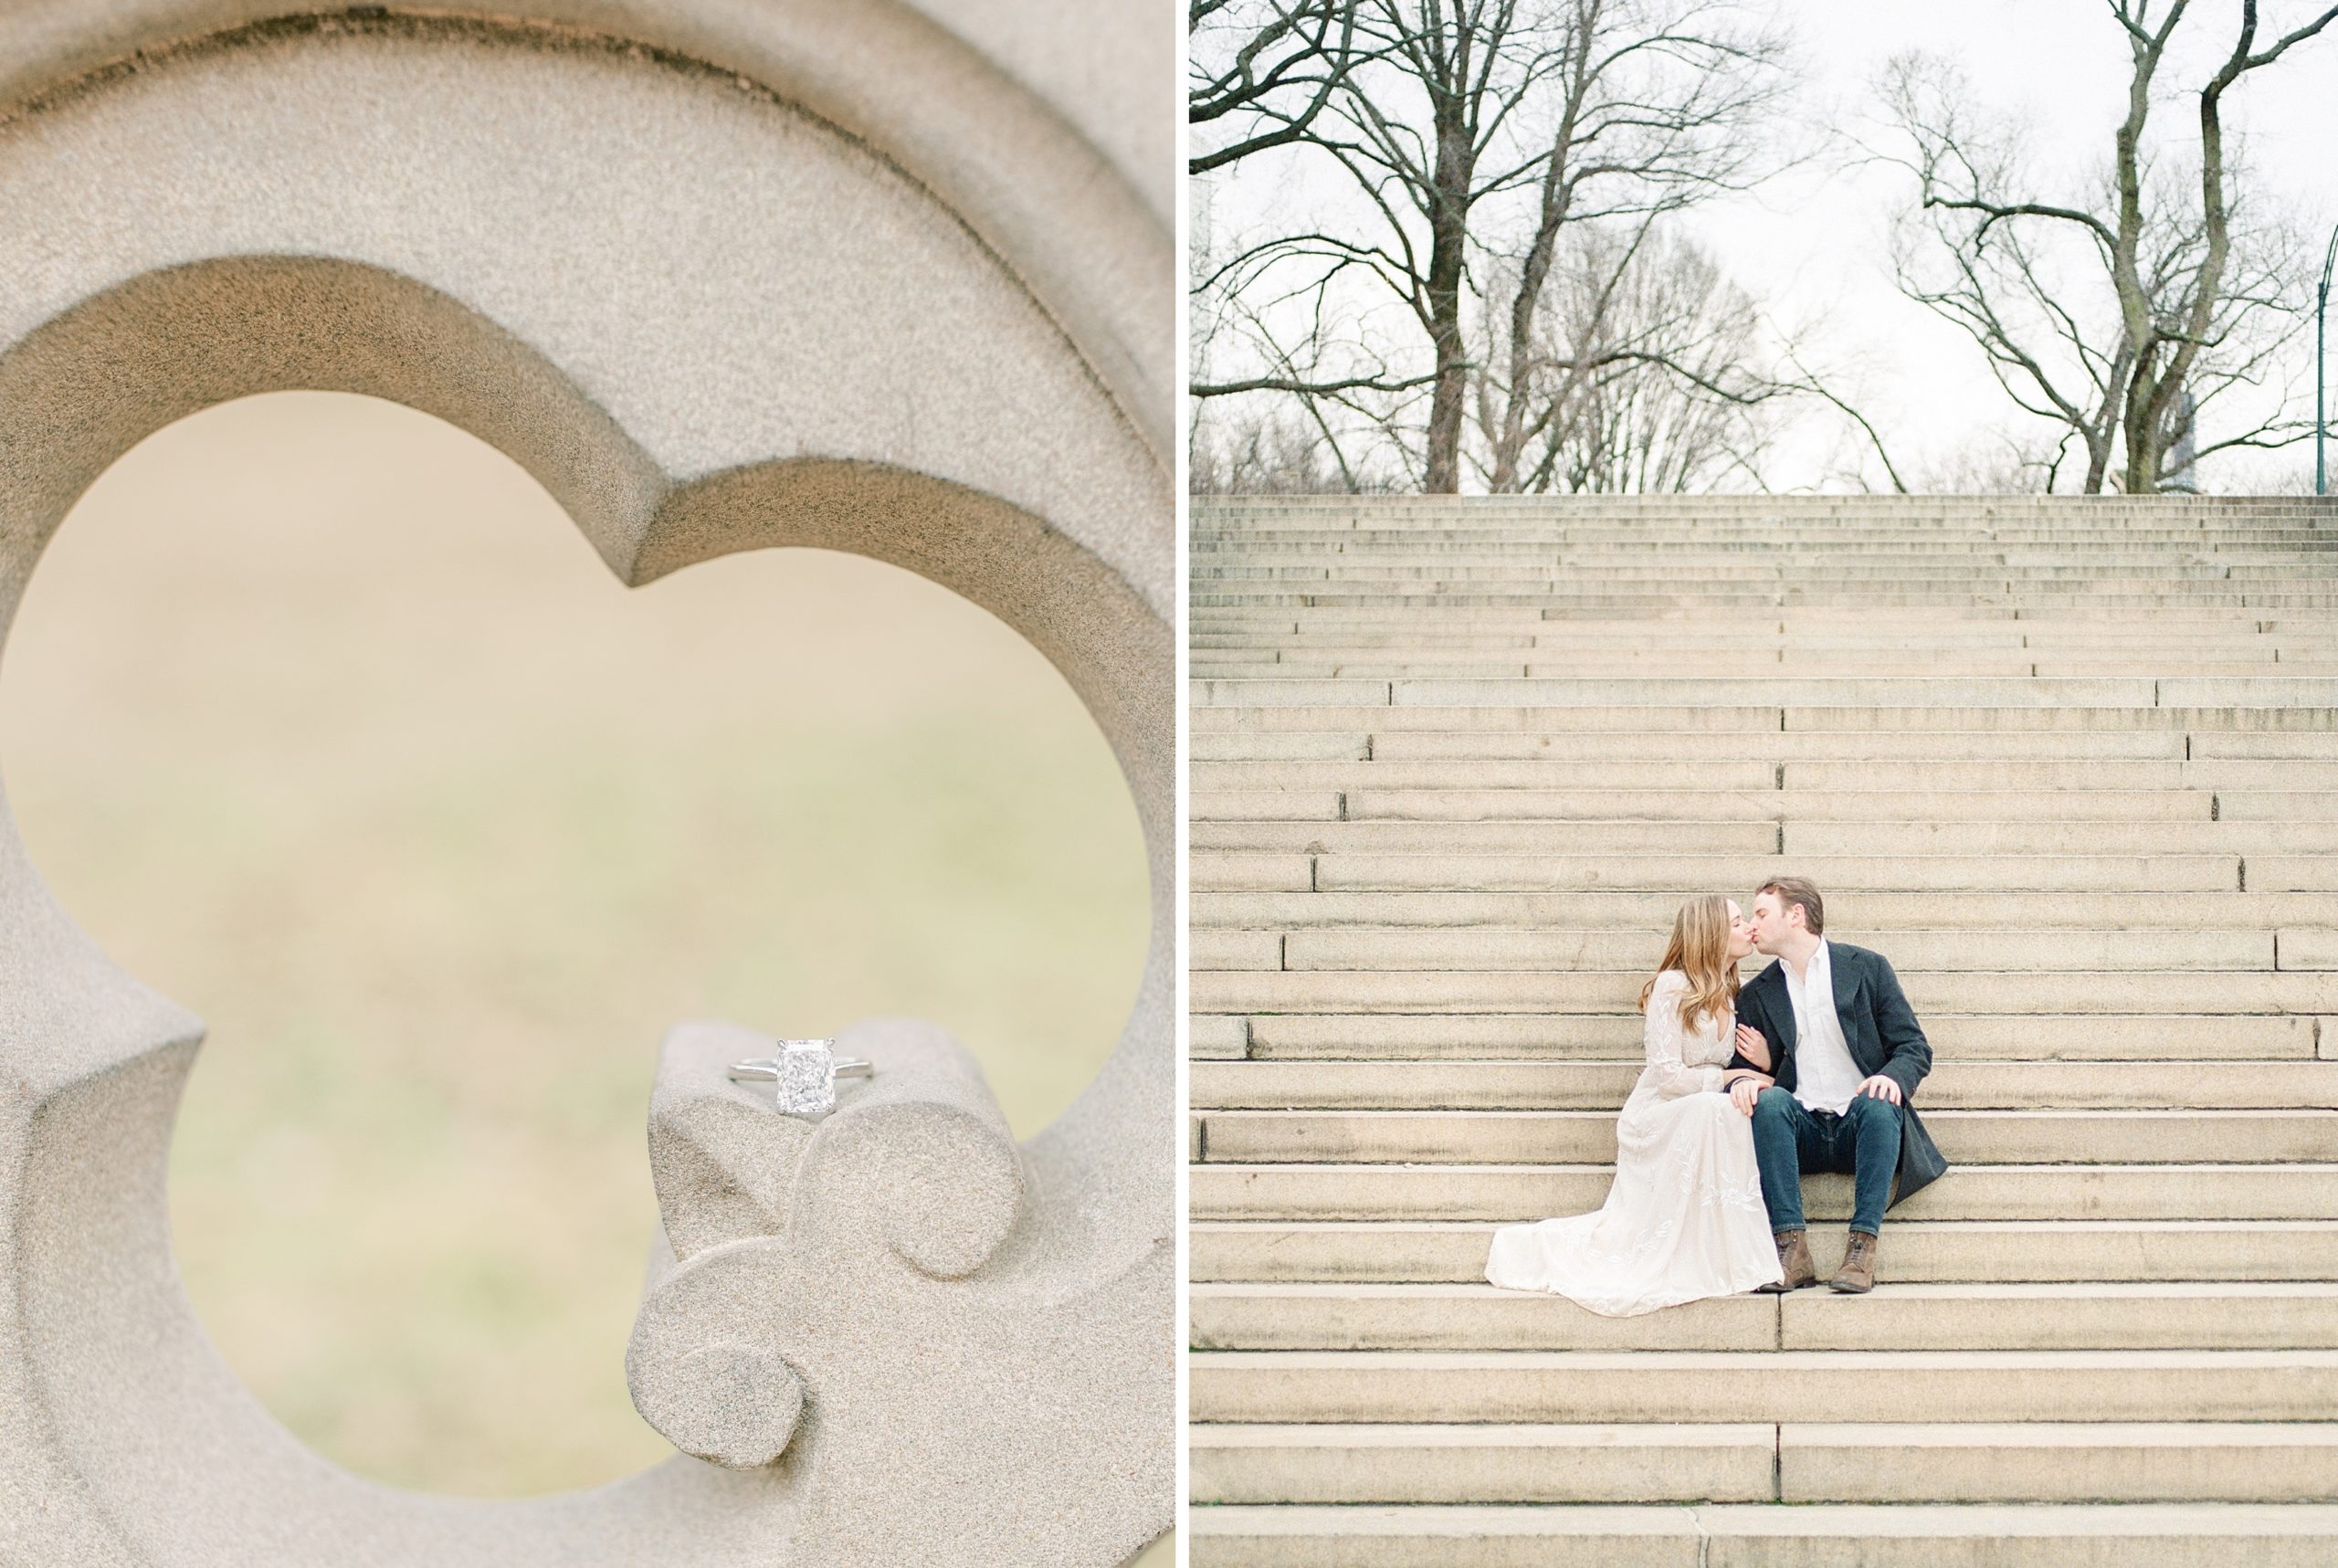 A beautiful Central Park Engagement Session in New York City at Bethesda Terrace and the iconic Bow Bridge.